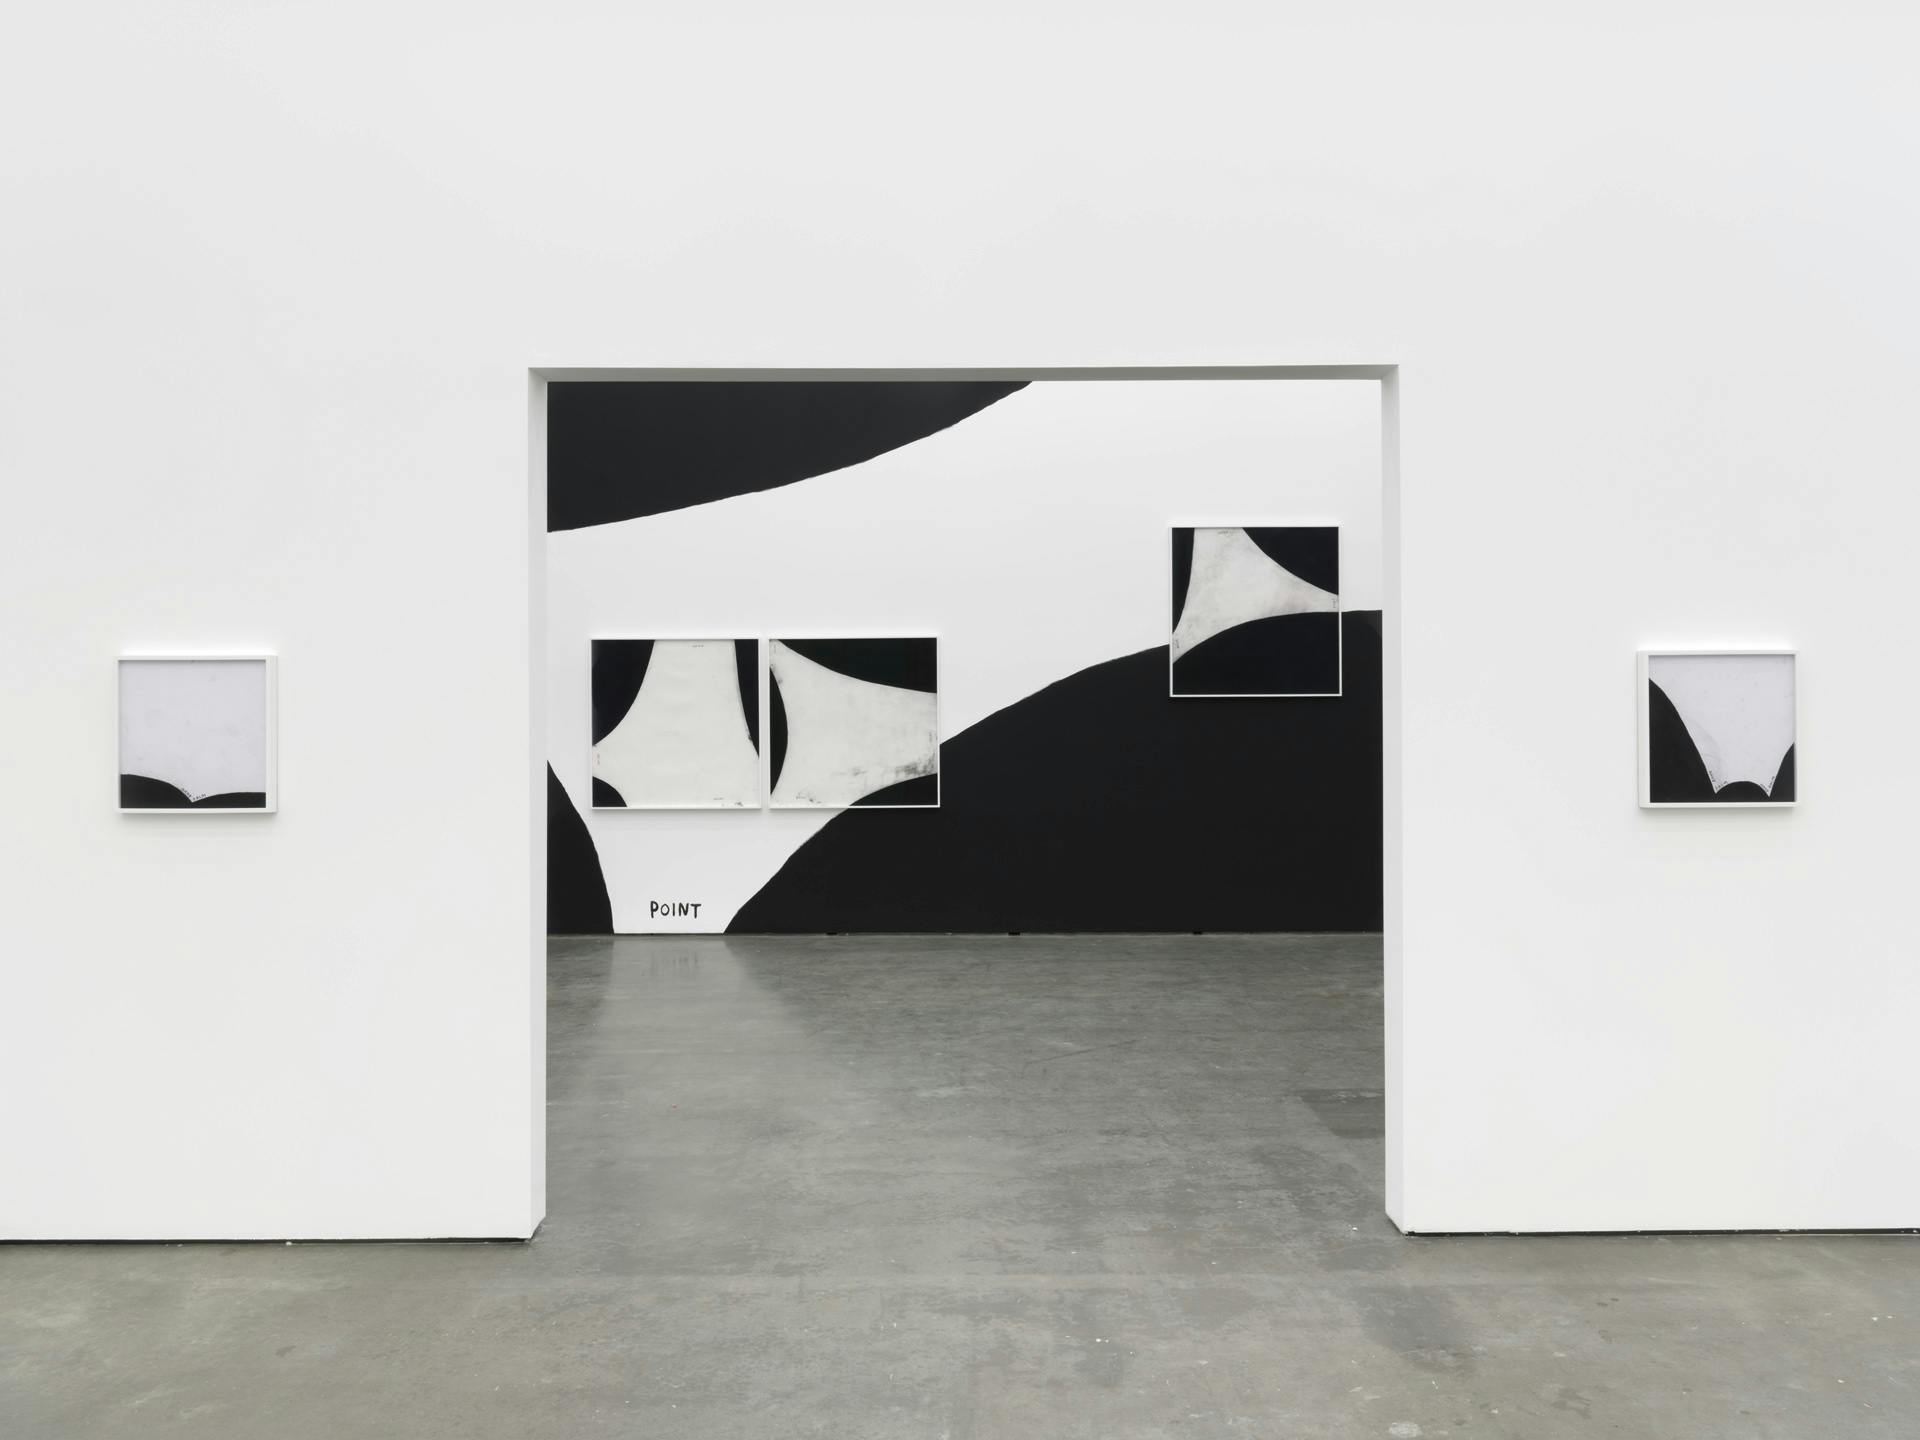 Two black and white drawings by Christine Sun Kim on a wall with an opening, through which a wall painting featuring the word "point" and three other drawings by Kim are visible.